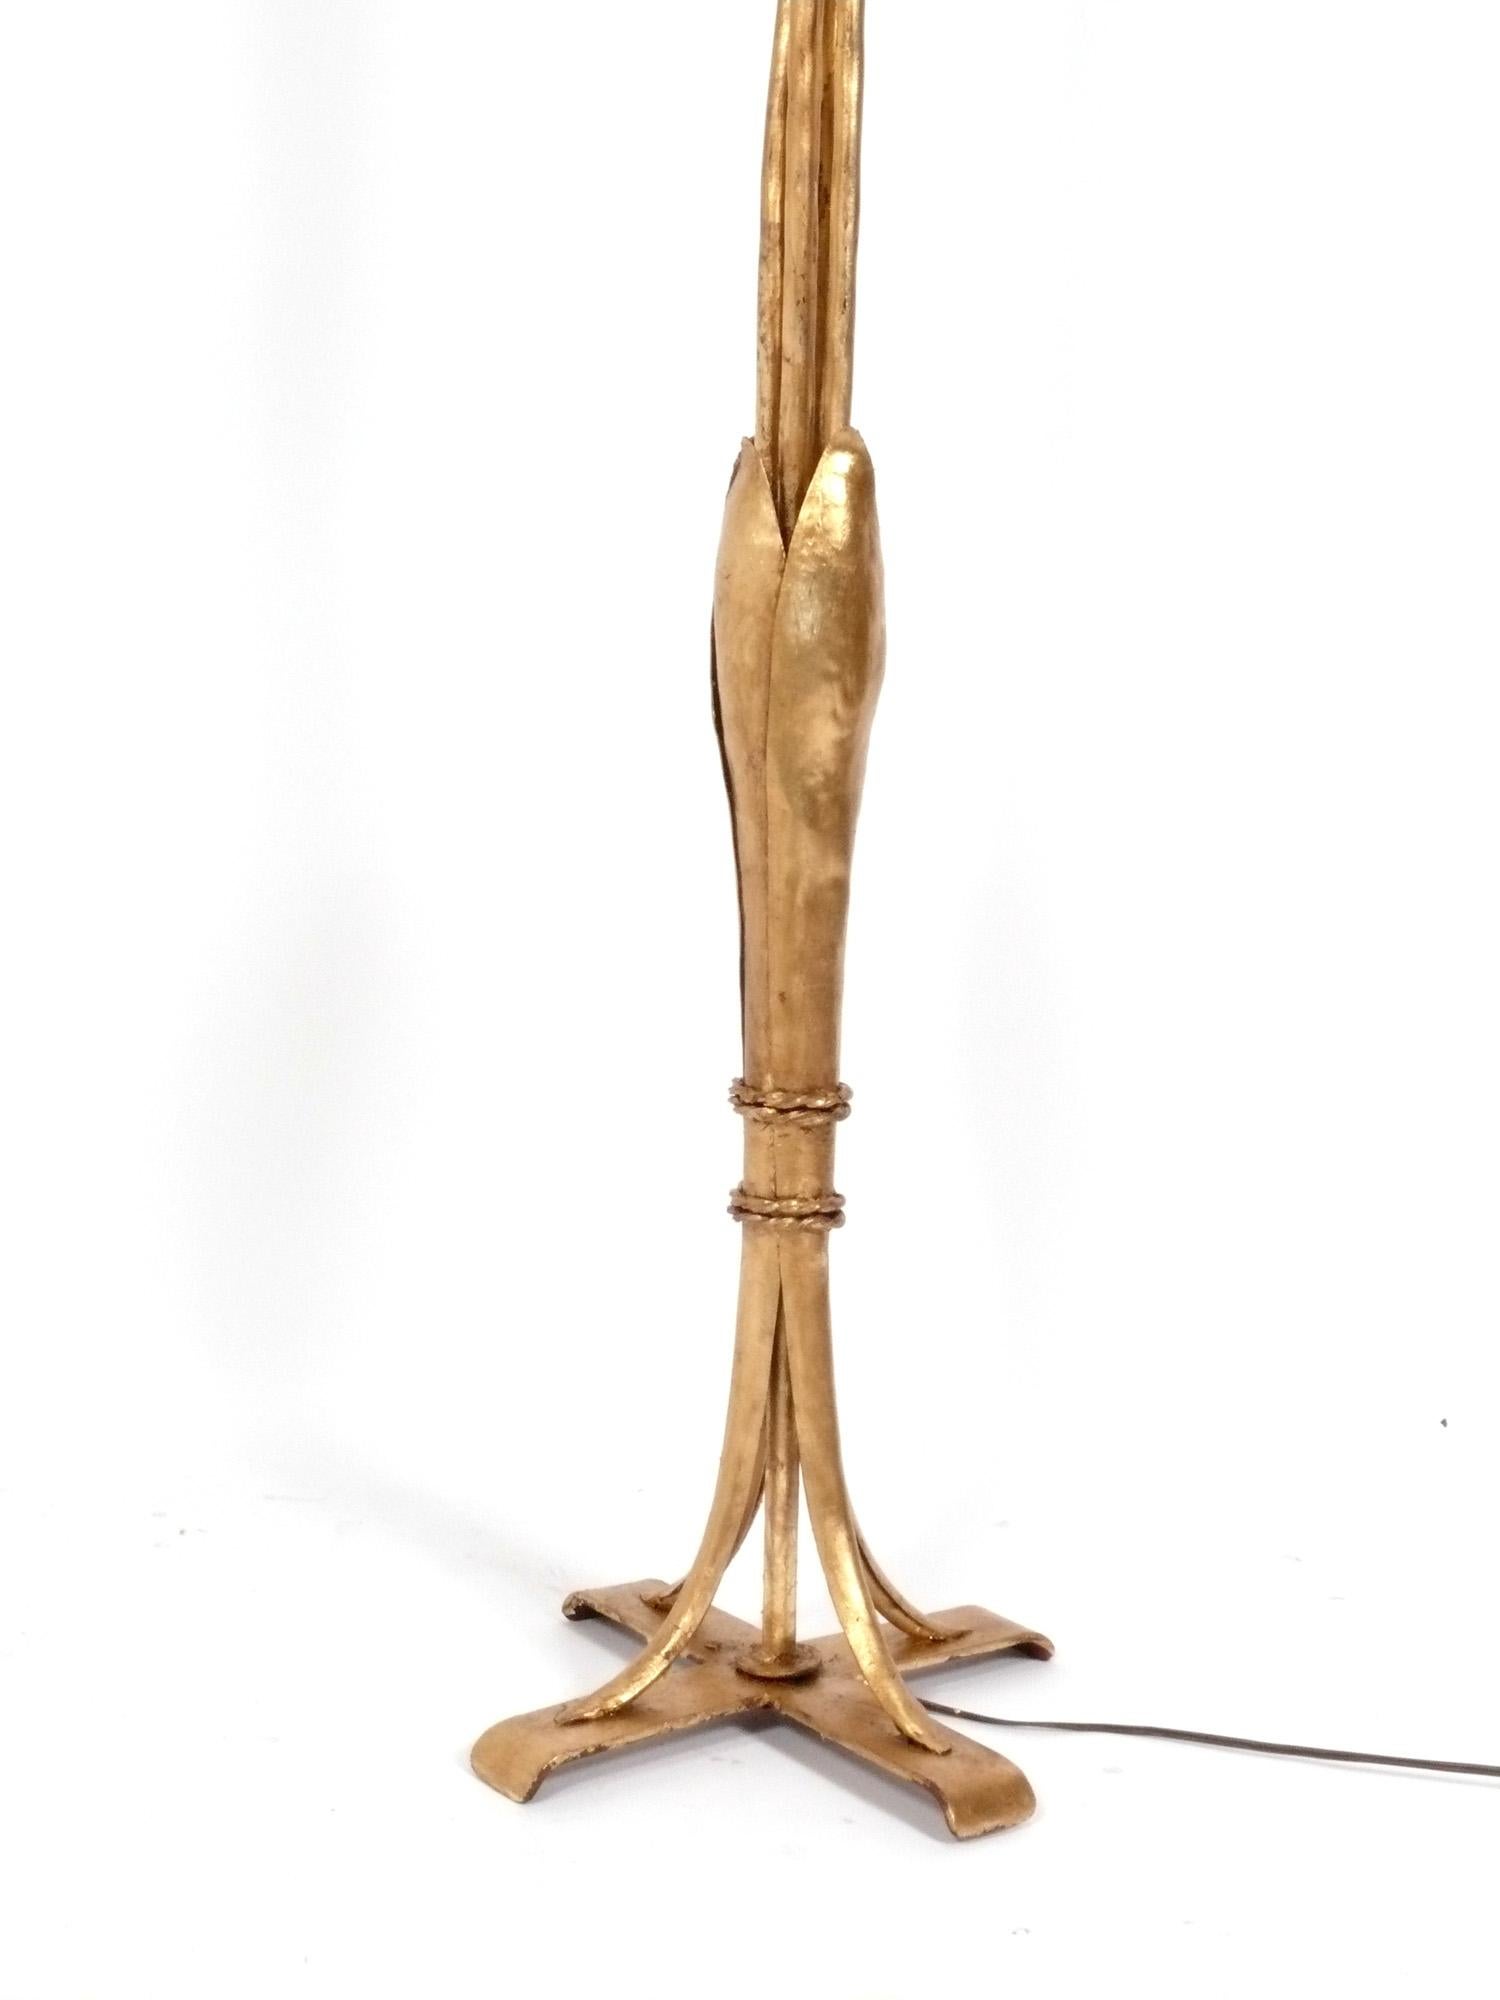 Hollywood Regency 1940s French Floriform Gilt Metal Floor Lamp attributed to Maison Bagues For Sale